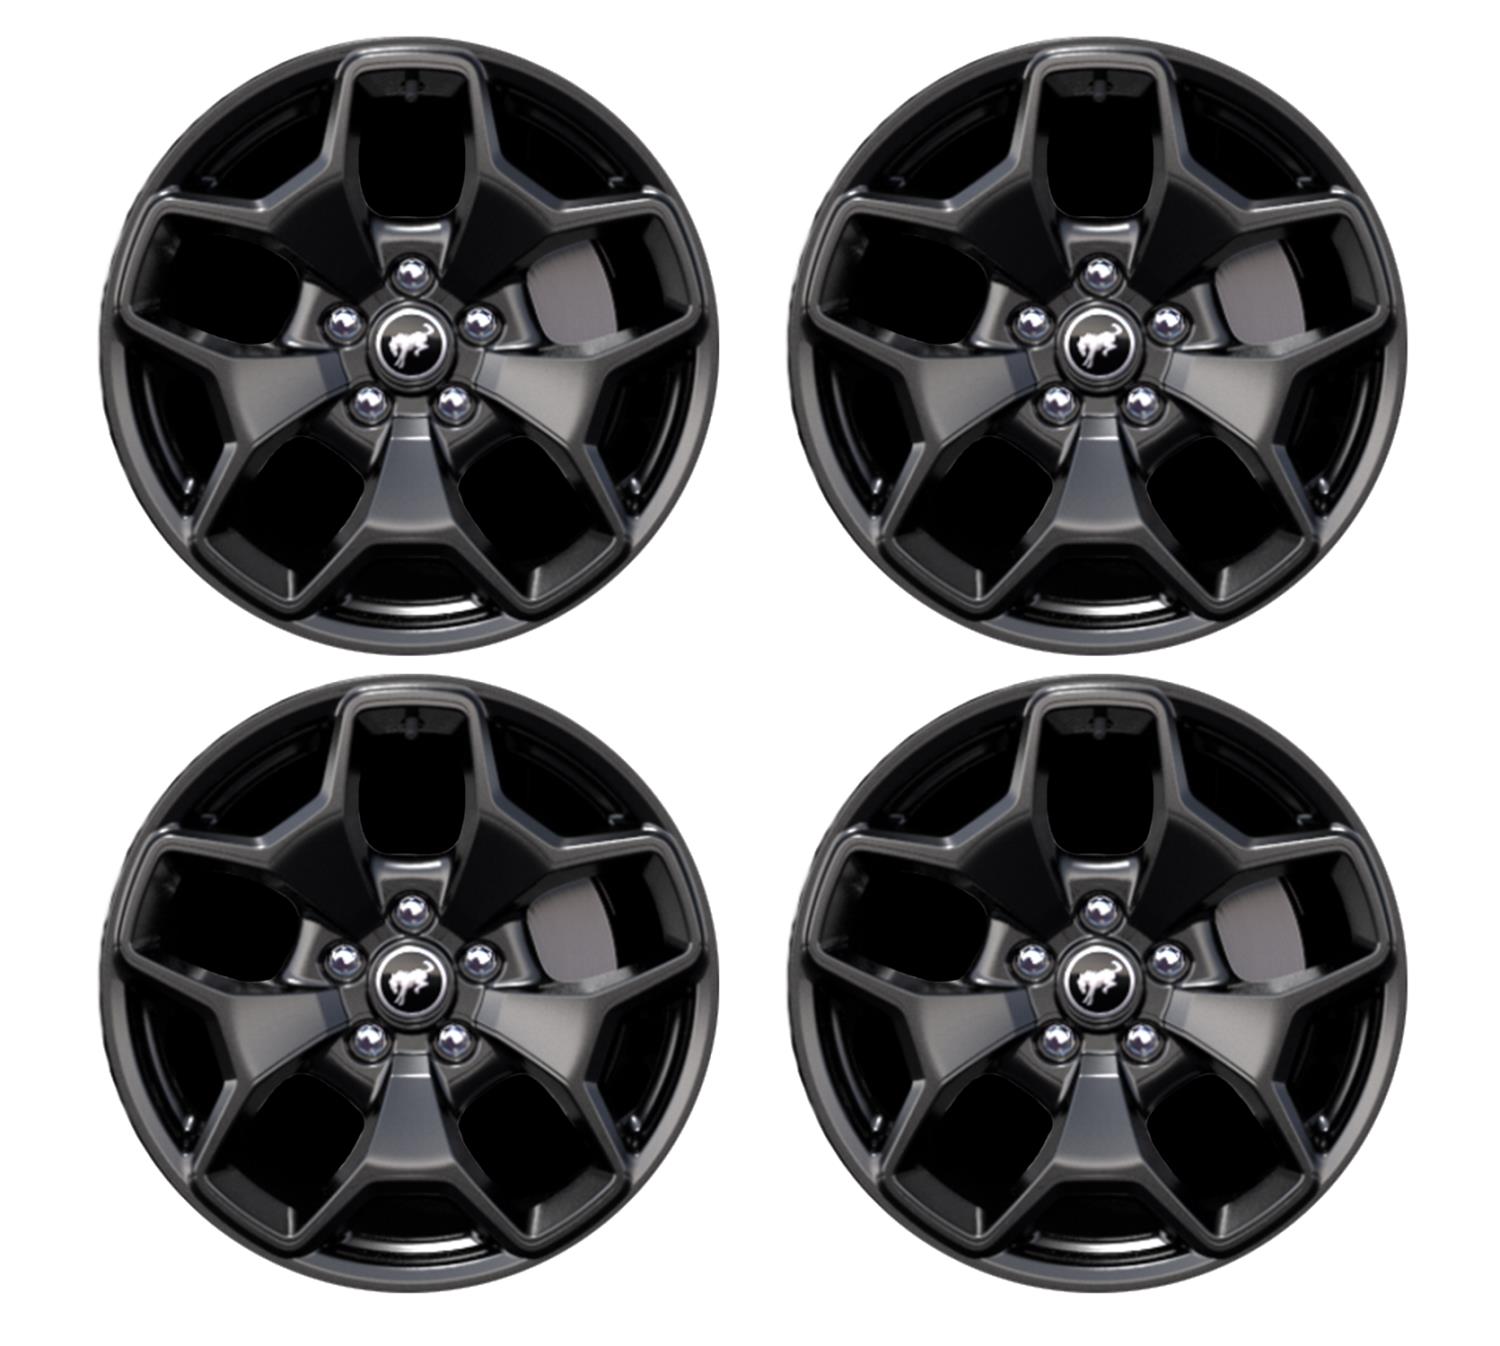 M-1007K-BS17GB First Edition Wheel Kit Fits Late Model Ford Bronco Sport Models [17" x 7"] Gloss Black